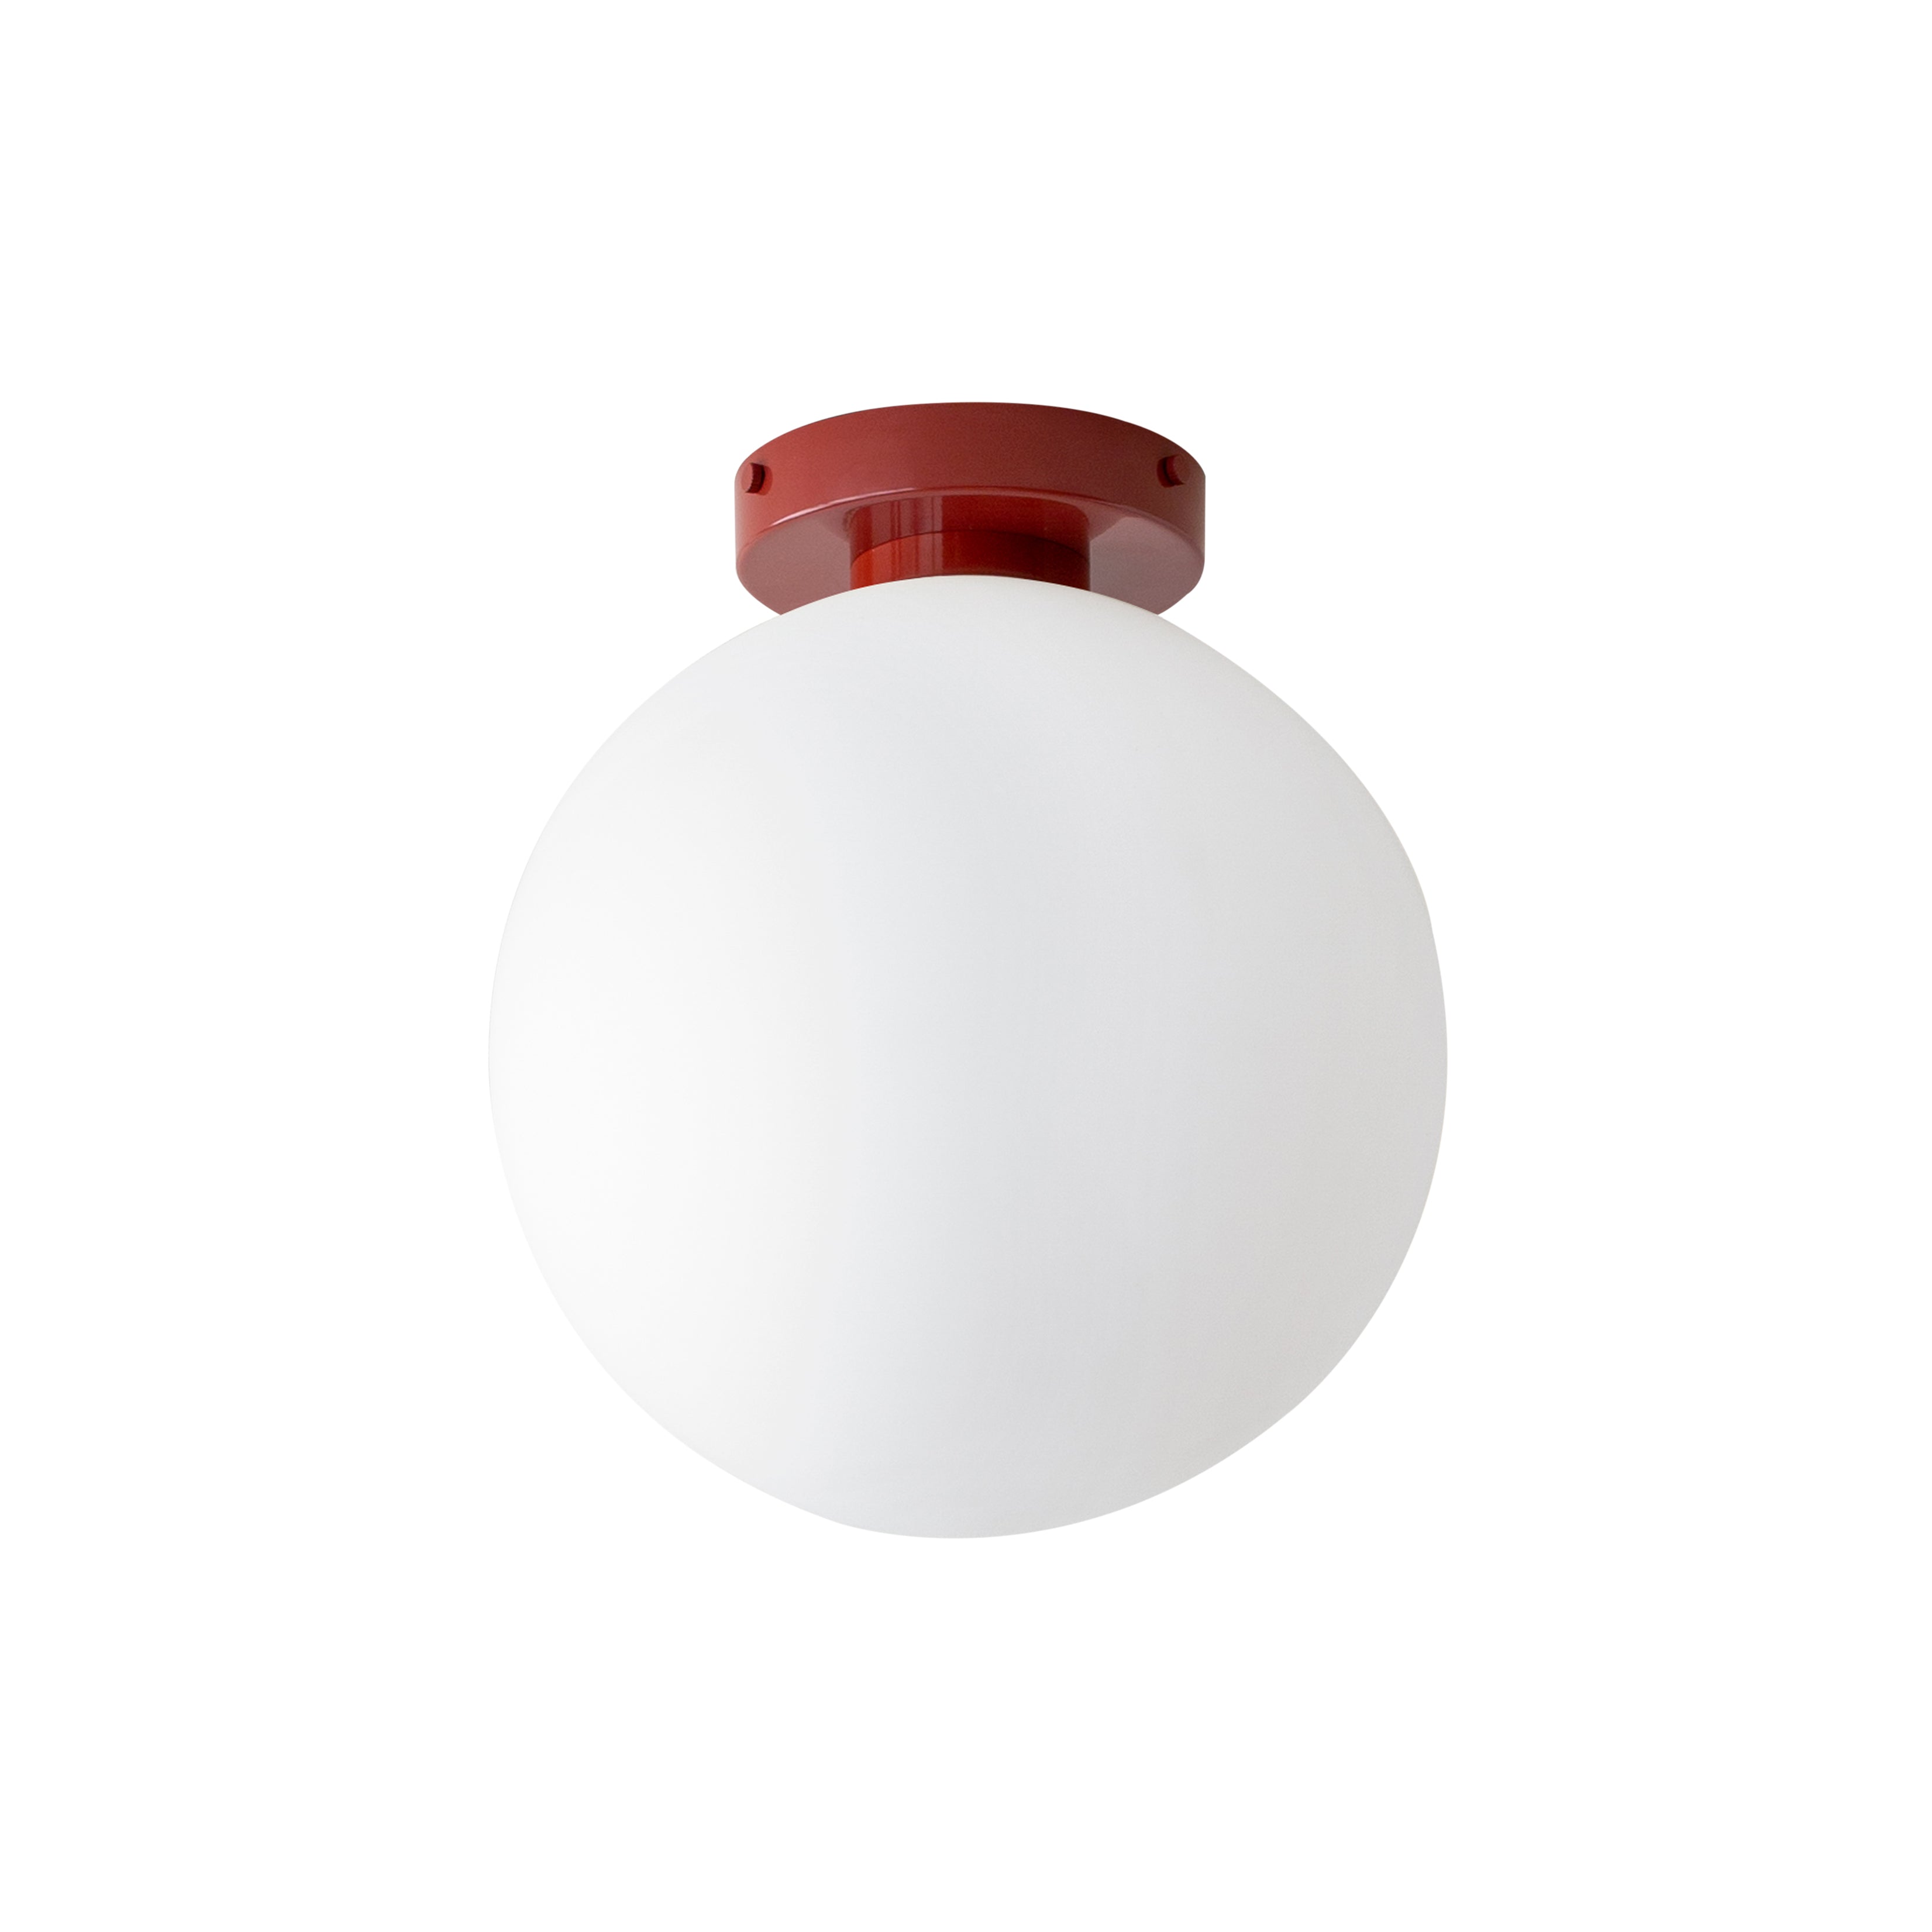 Orb 10 Surface Mount: Oxide Red